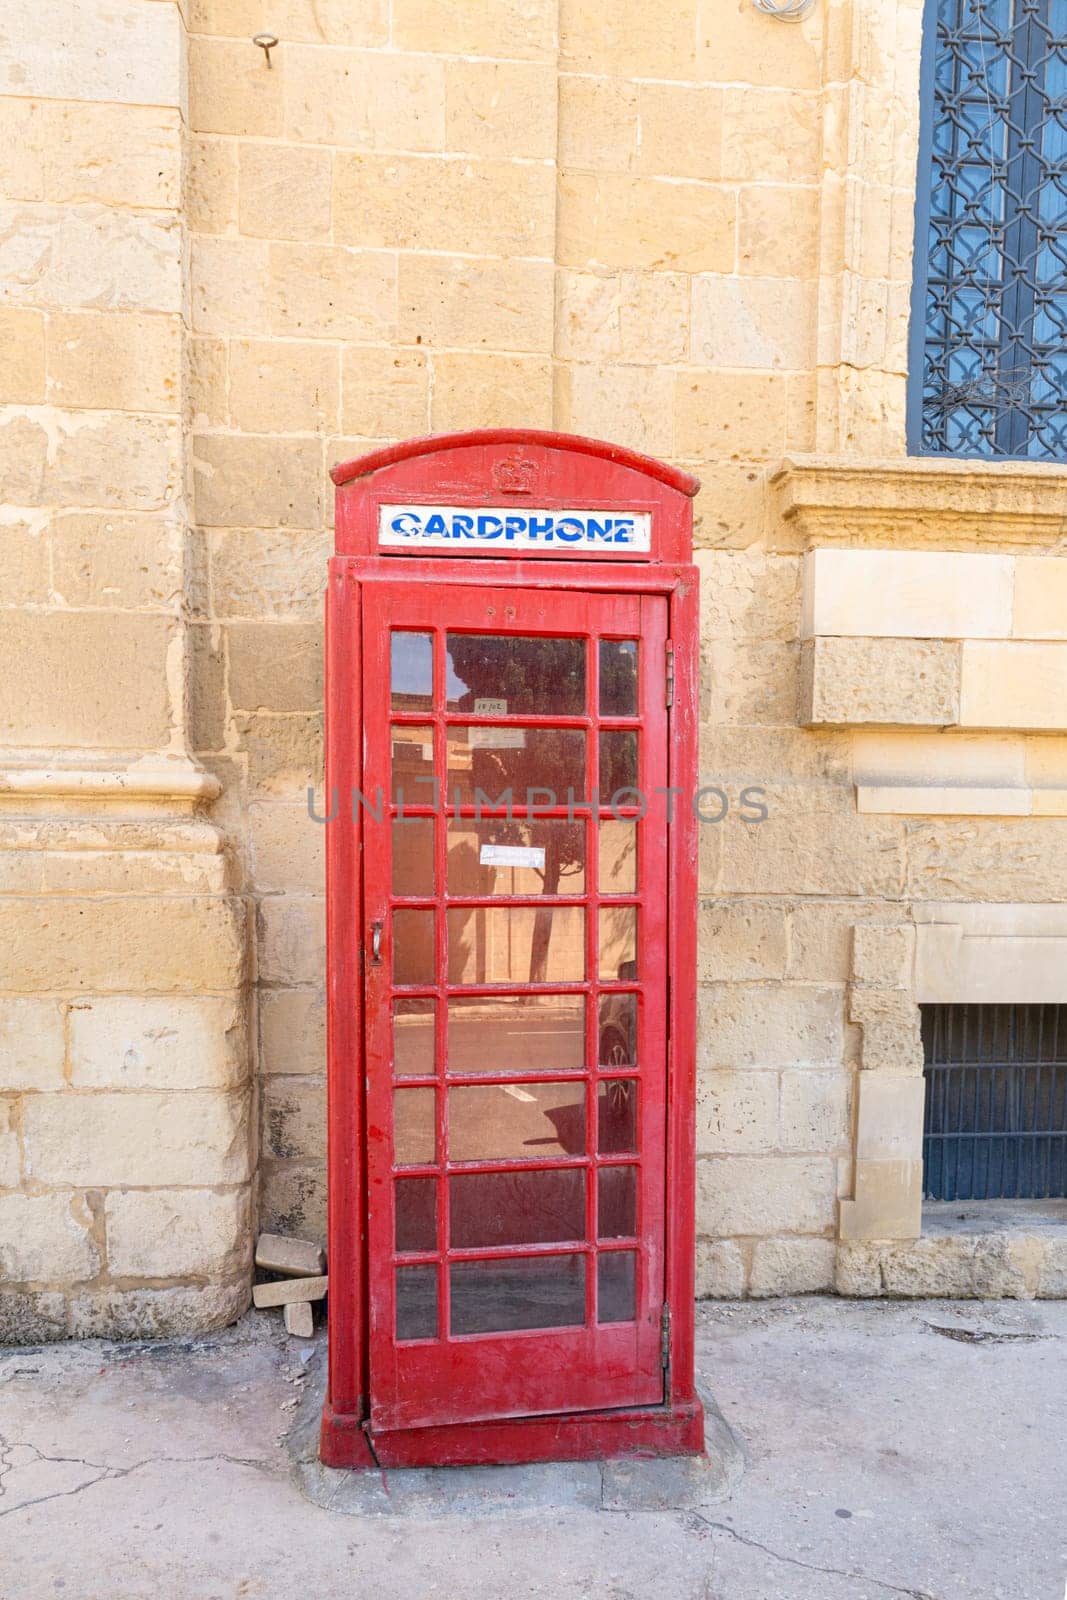 Old Telephone booth in Valletta, Malta. by sergiodv